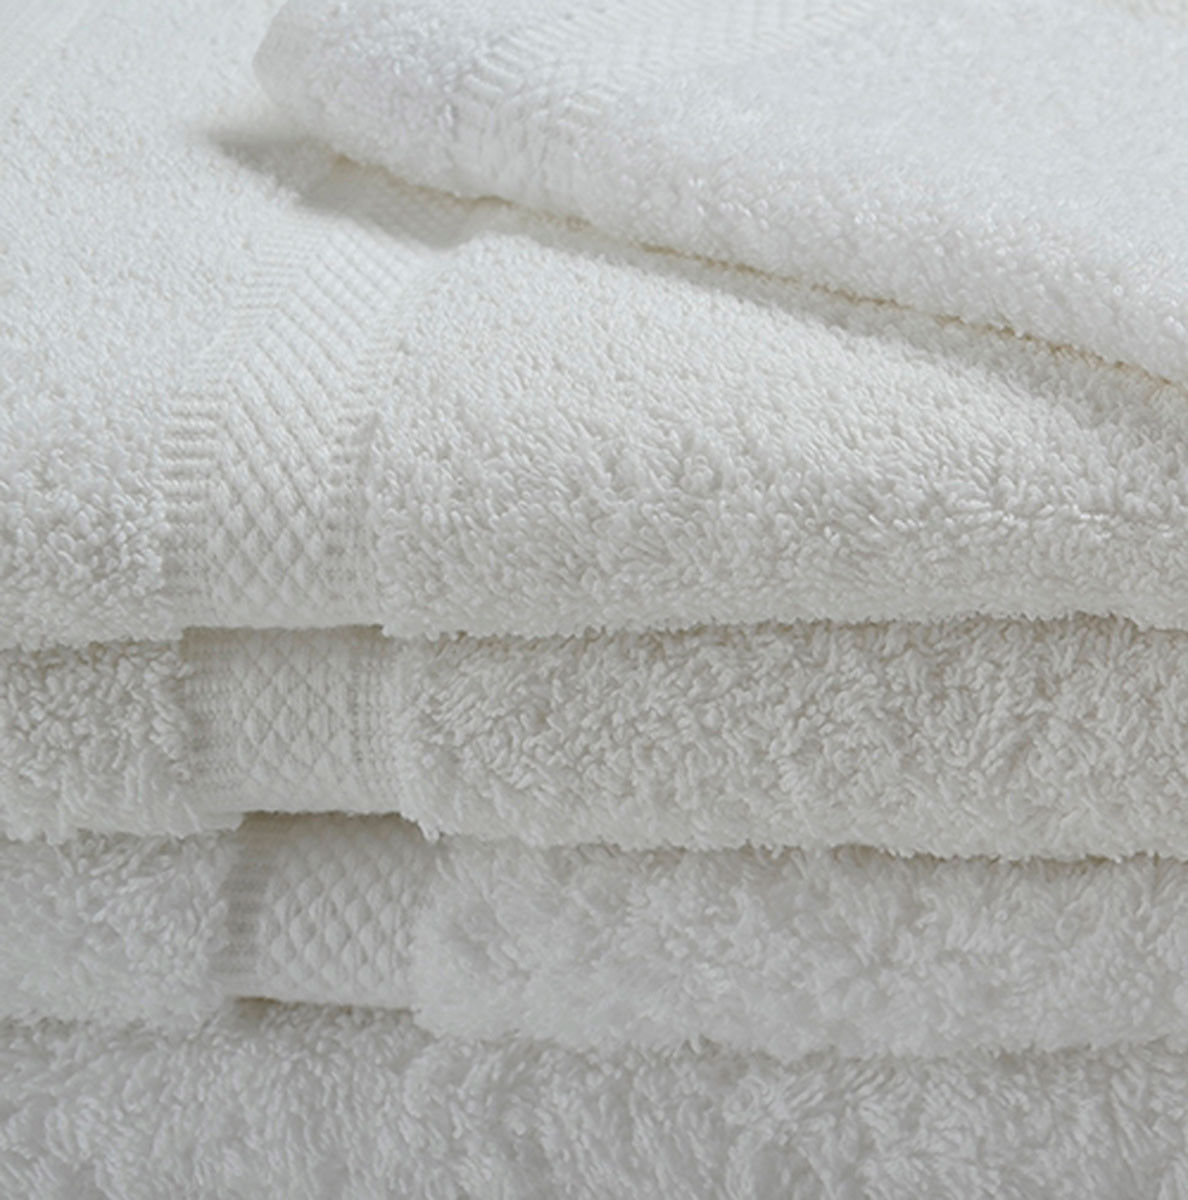 What brands are similar to the Oxford Imperiale Towels in the white collection?